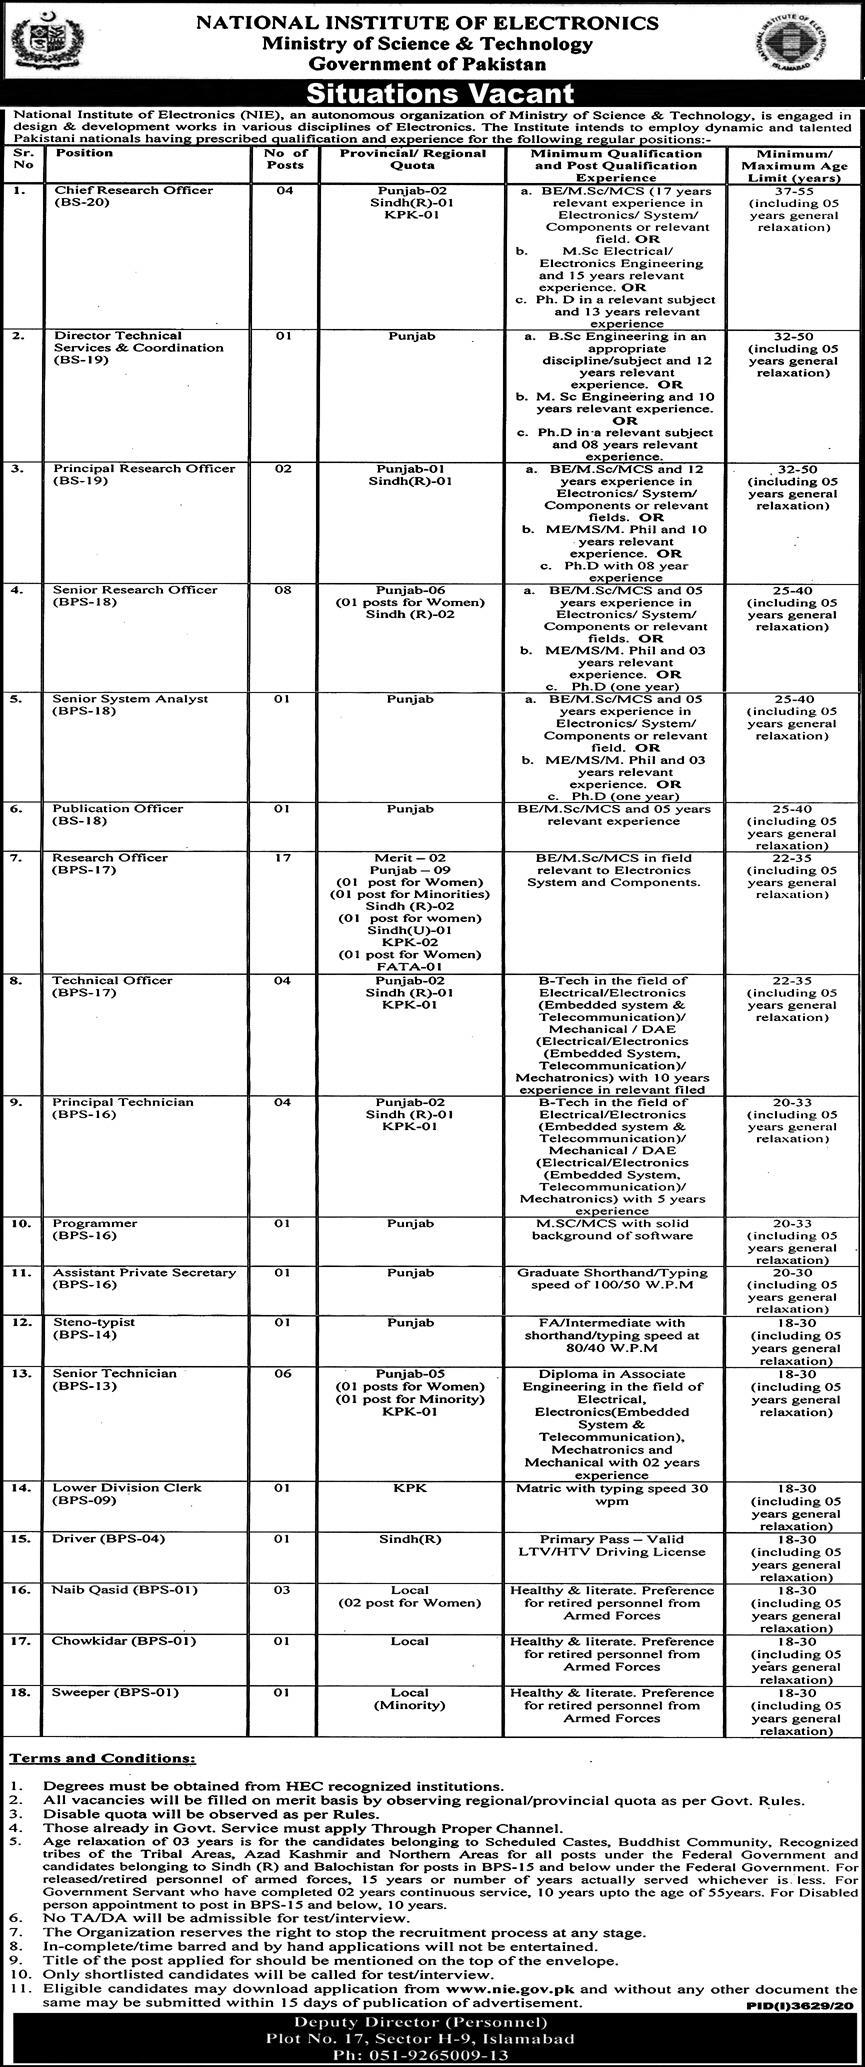 National Institute of Electronics Ministry of Science & Technology Jobs 2021